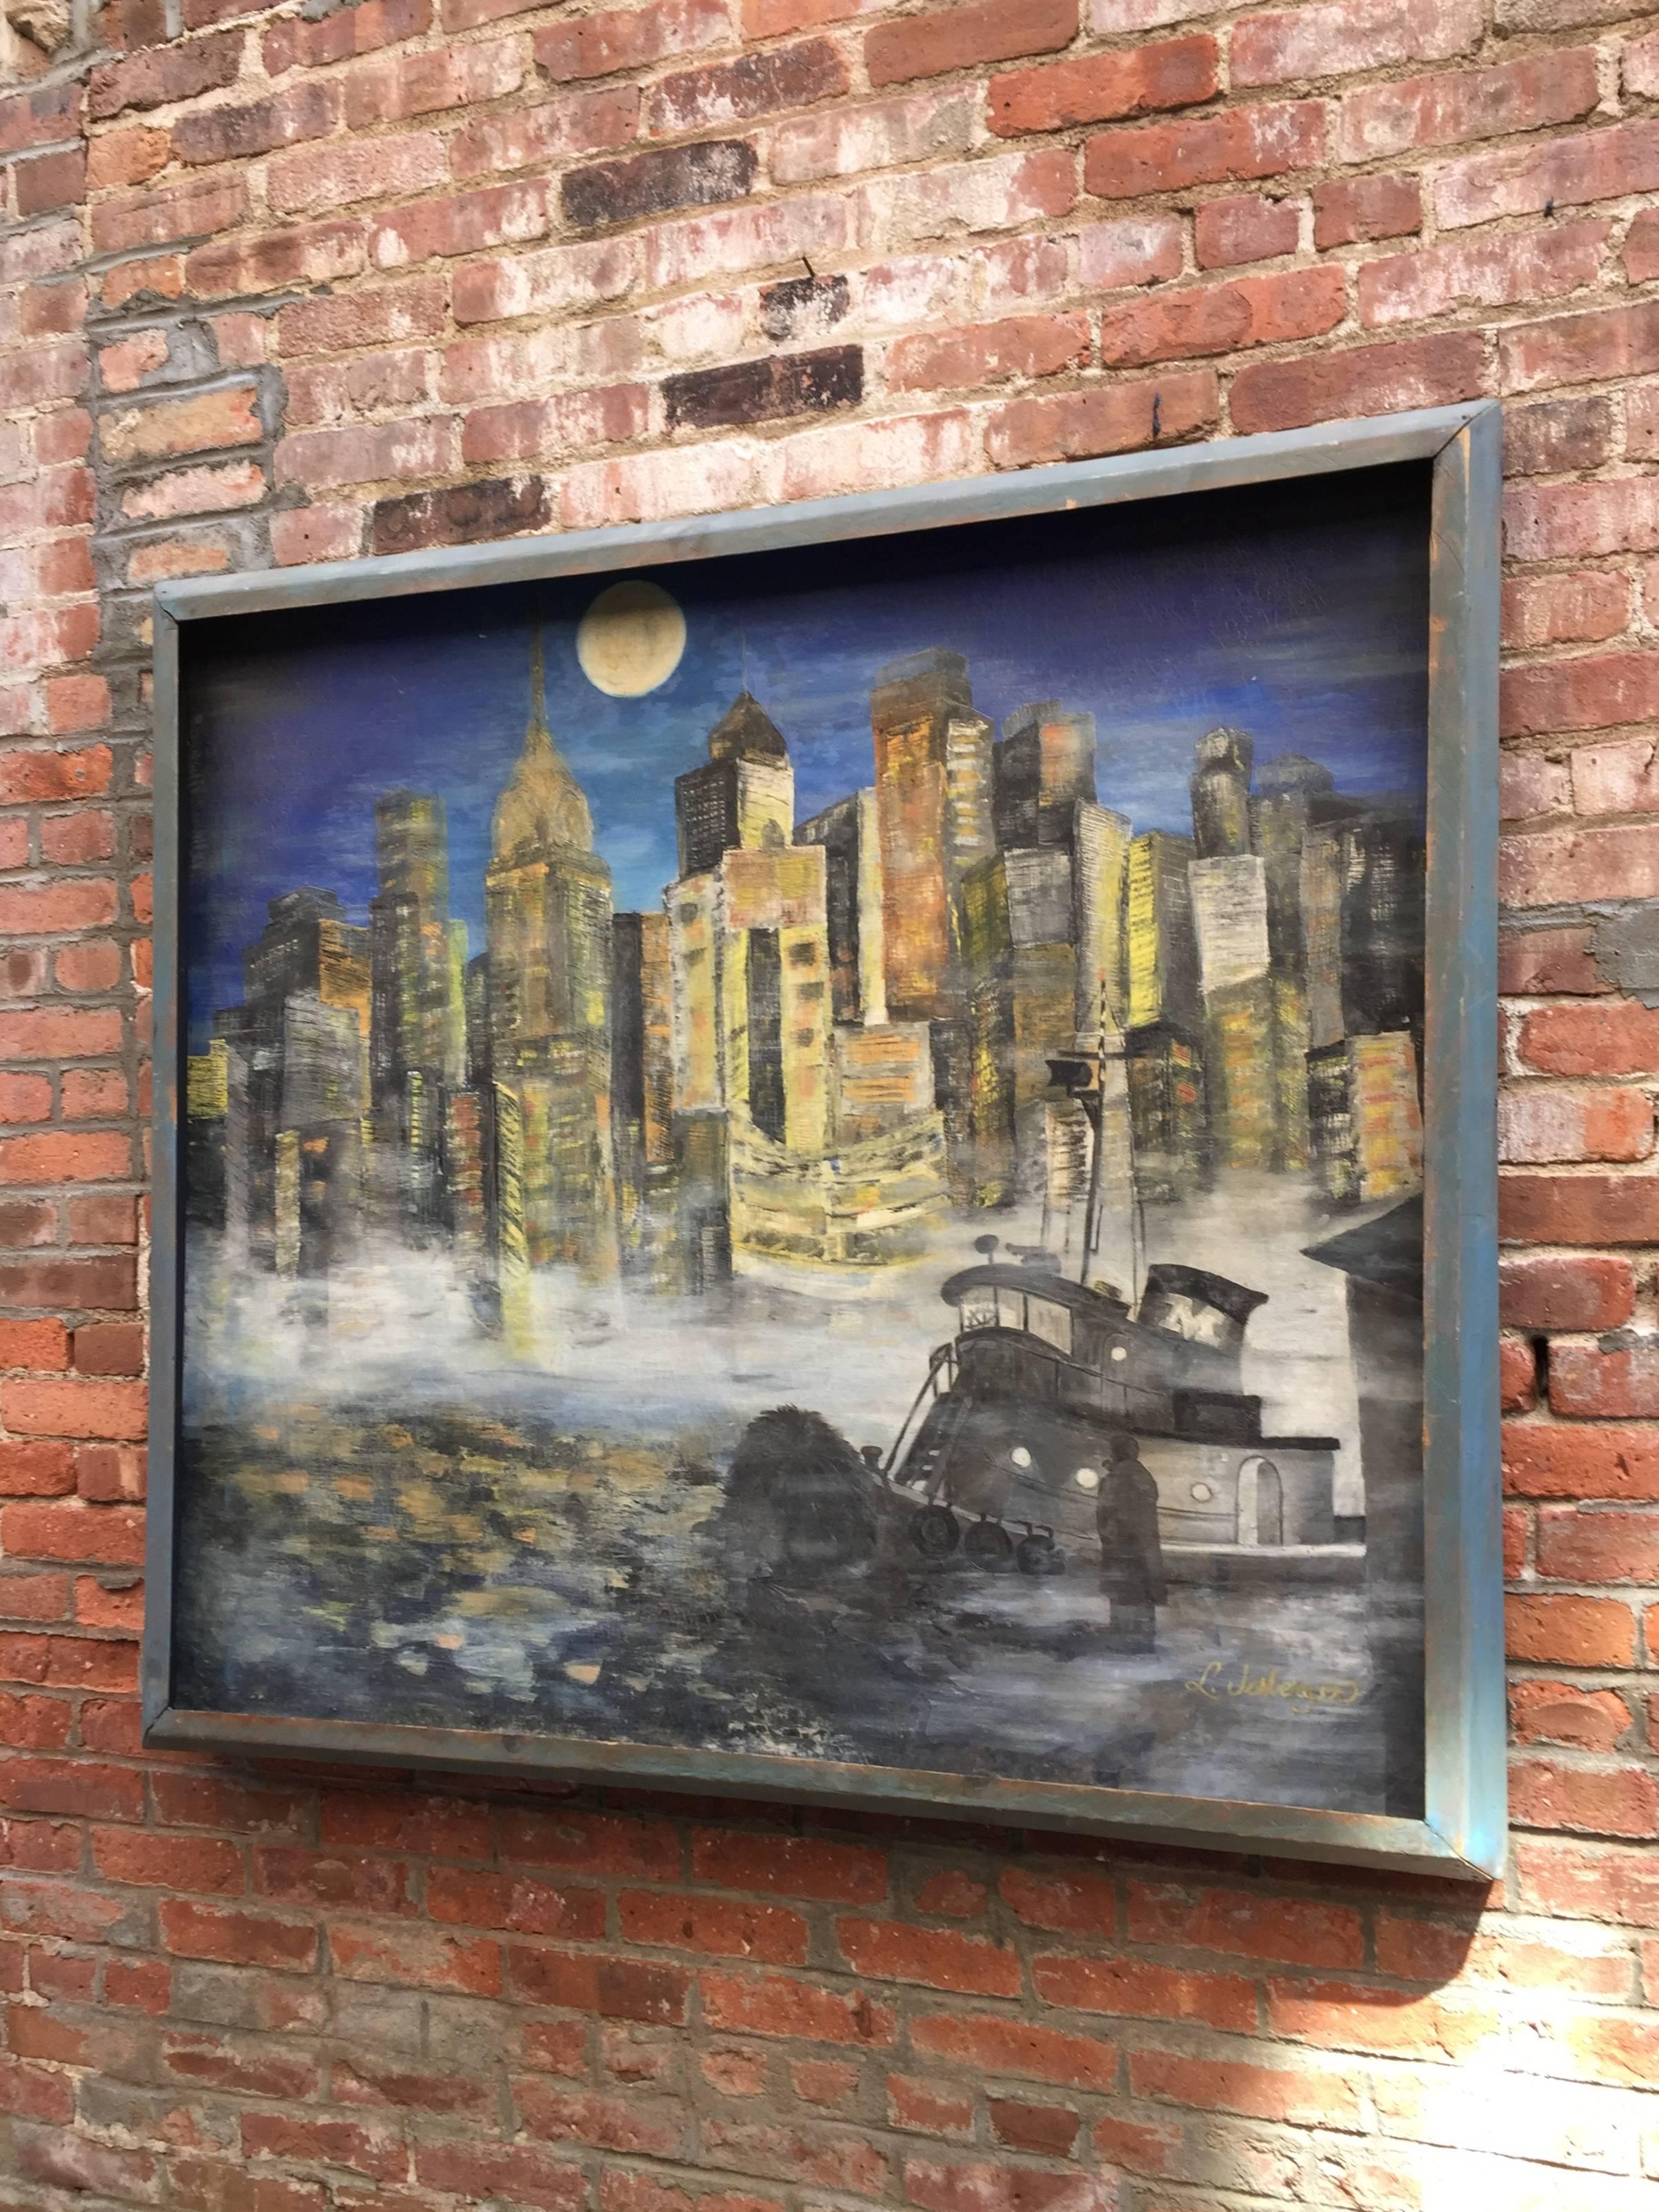 The oil on canvas is signed, L. Jesberger, lower right, has an amazing noir feel to it. The moored tugboat and Silhouette figure in the foreground are juxtaposed with the highly illuminated background of the city with the full moon above. The rough